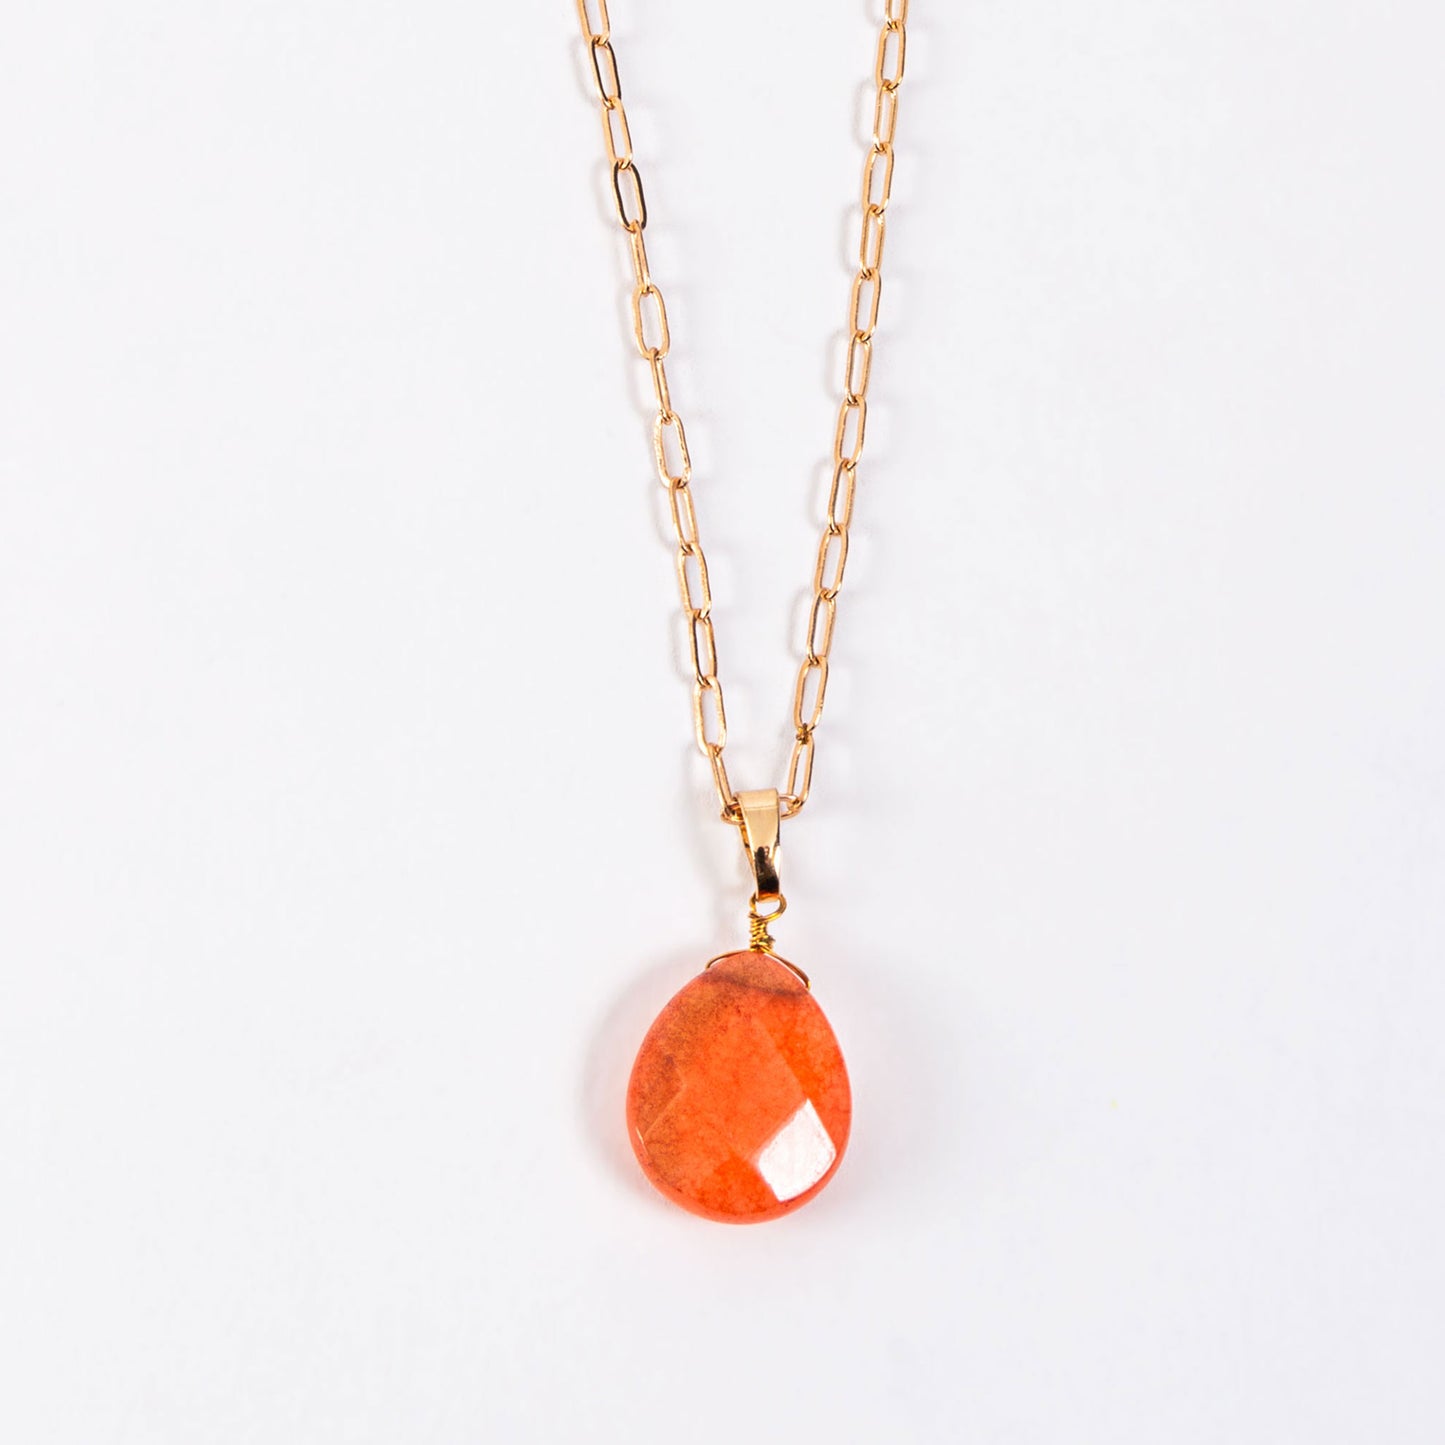 Faceted Red Sponge Coral 20" Pendant Necklace